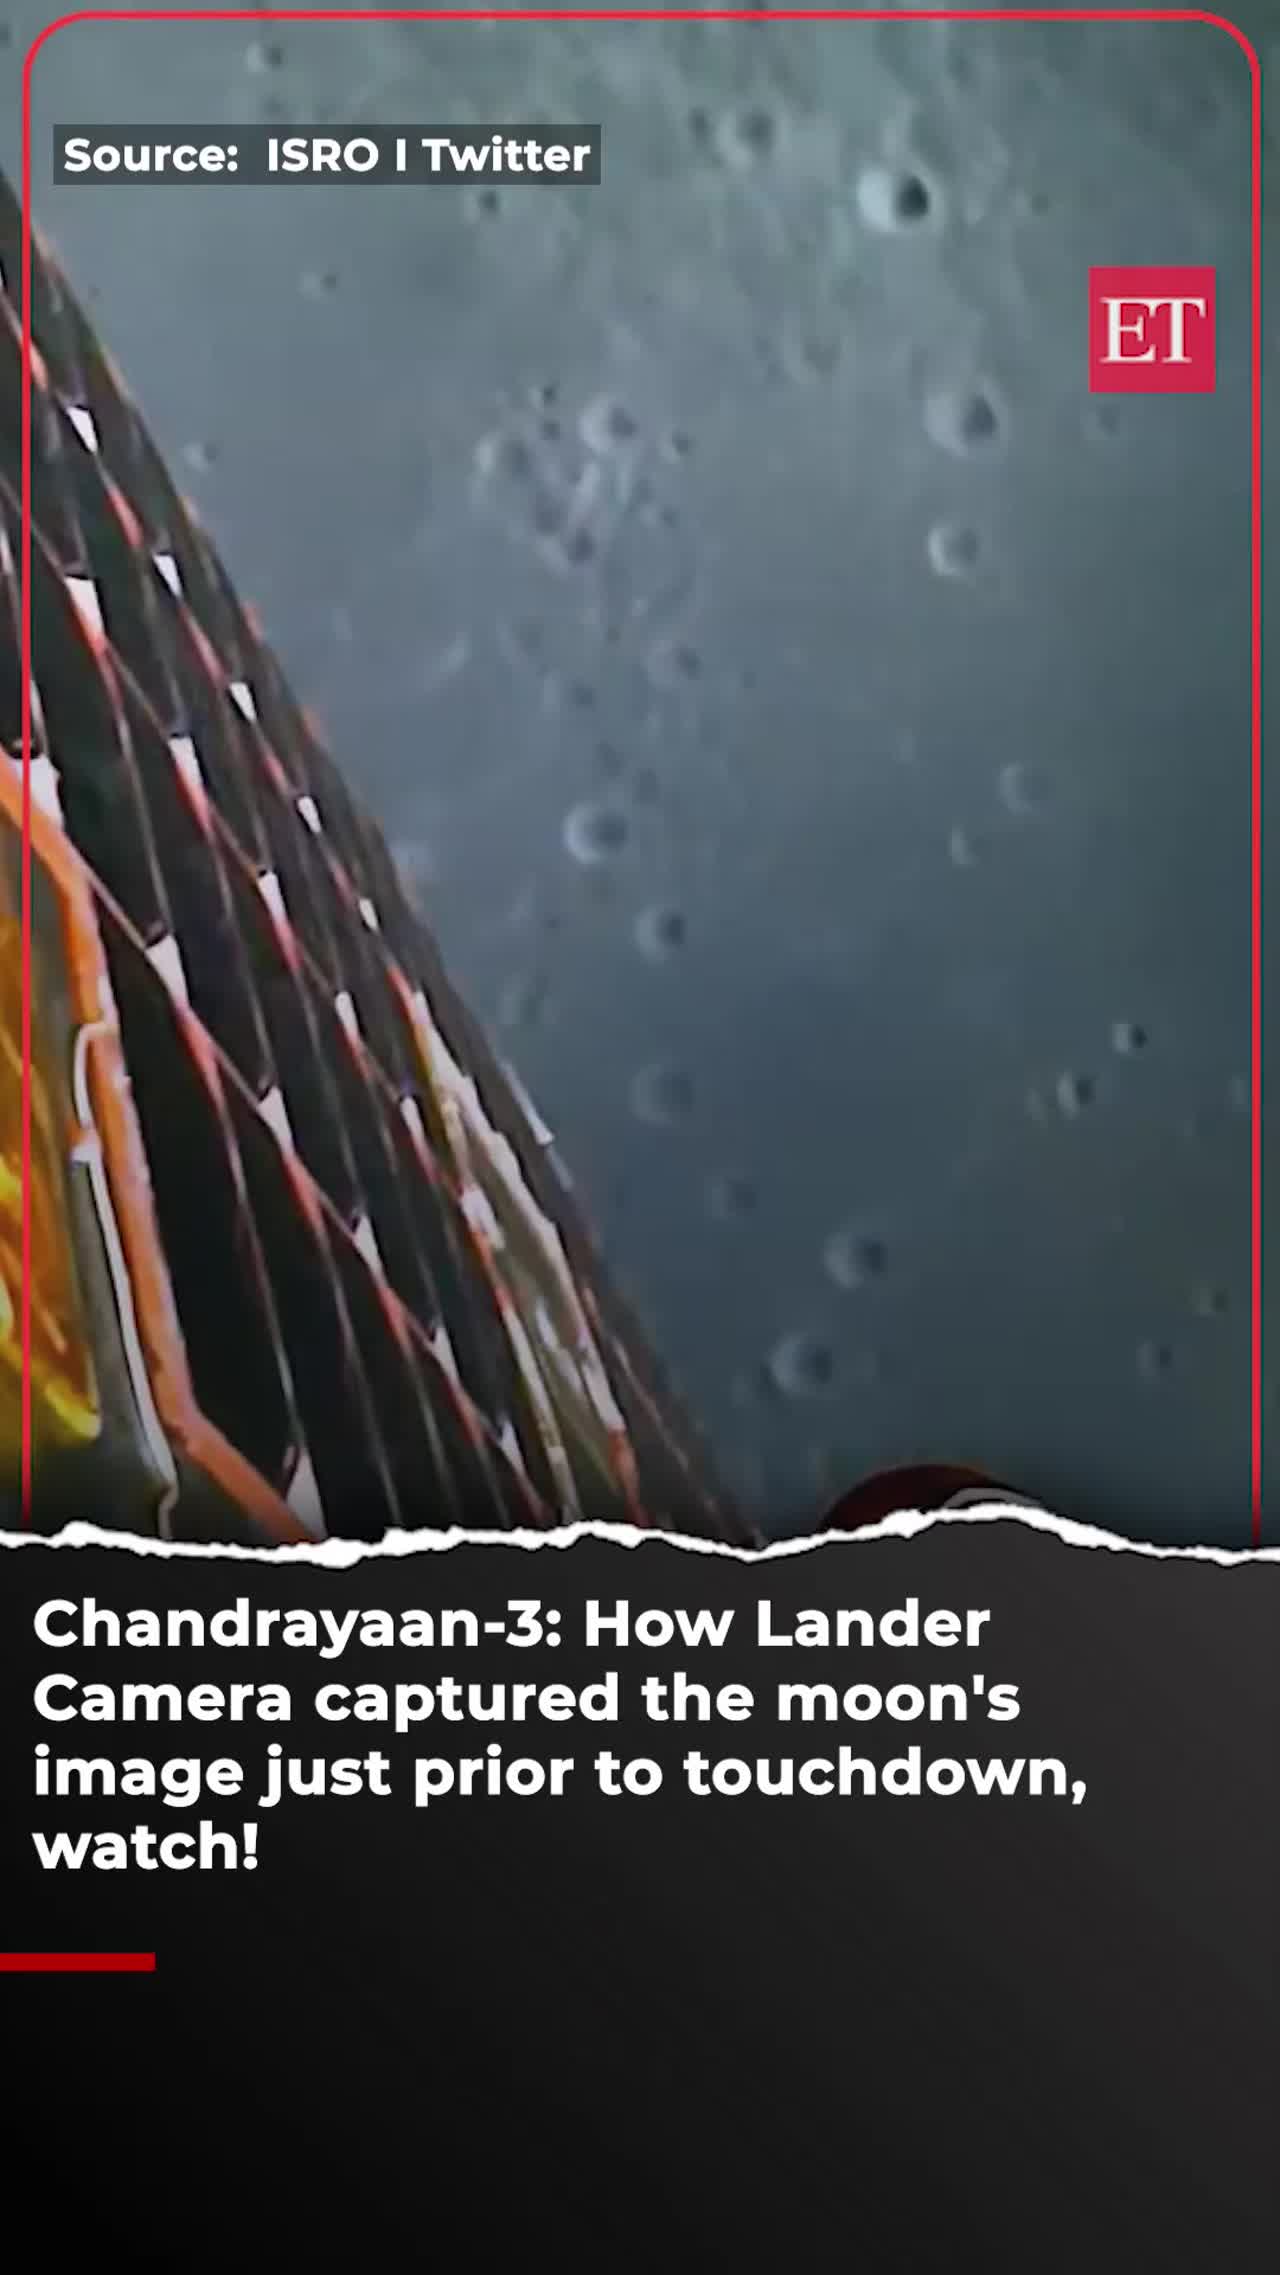 Chandrayaan-3: How Lander Camera captured the moon's image just prior to touchdown, watch!